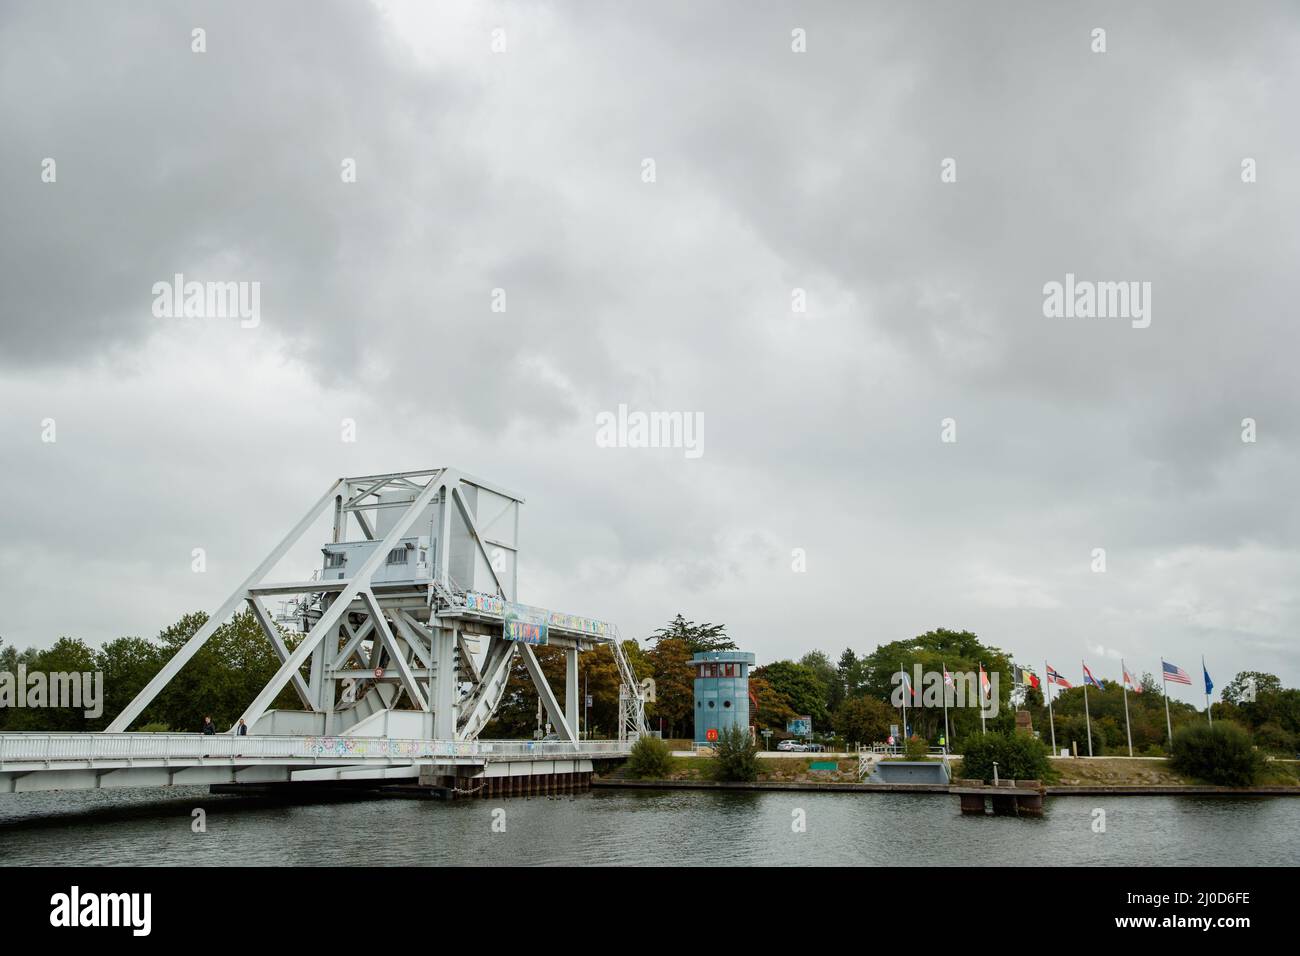 Pegasus Bridge (Benouville Bridge) World War 2 memorial in France and an important site for the D-Day invasion by Allied Forces Stock Photo